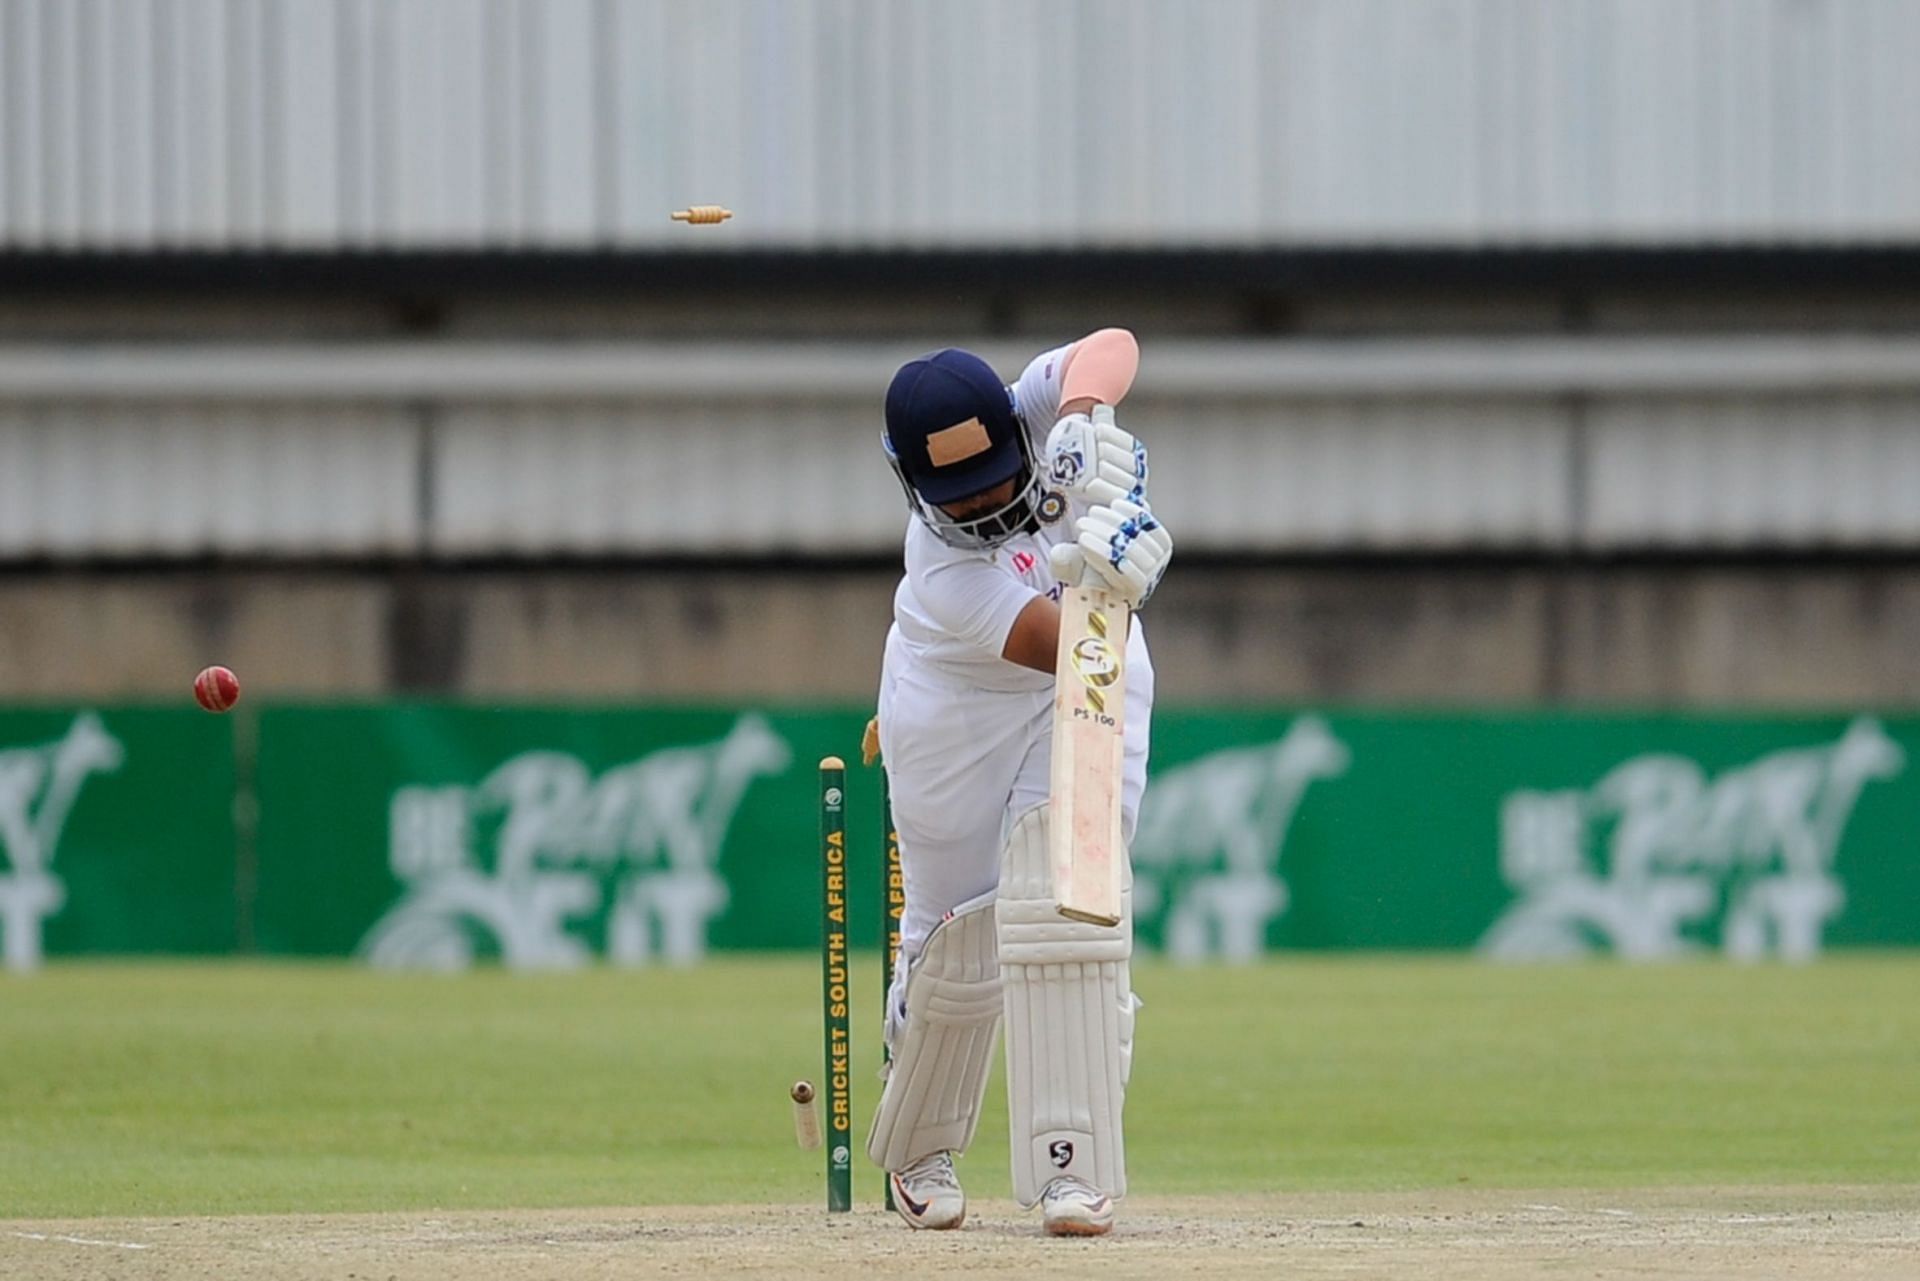 Prithvi Shaw has a double hundred in List A cricket